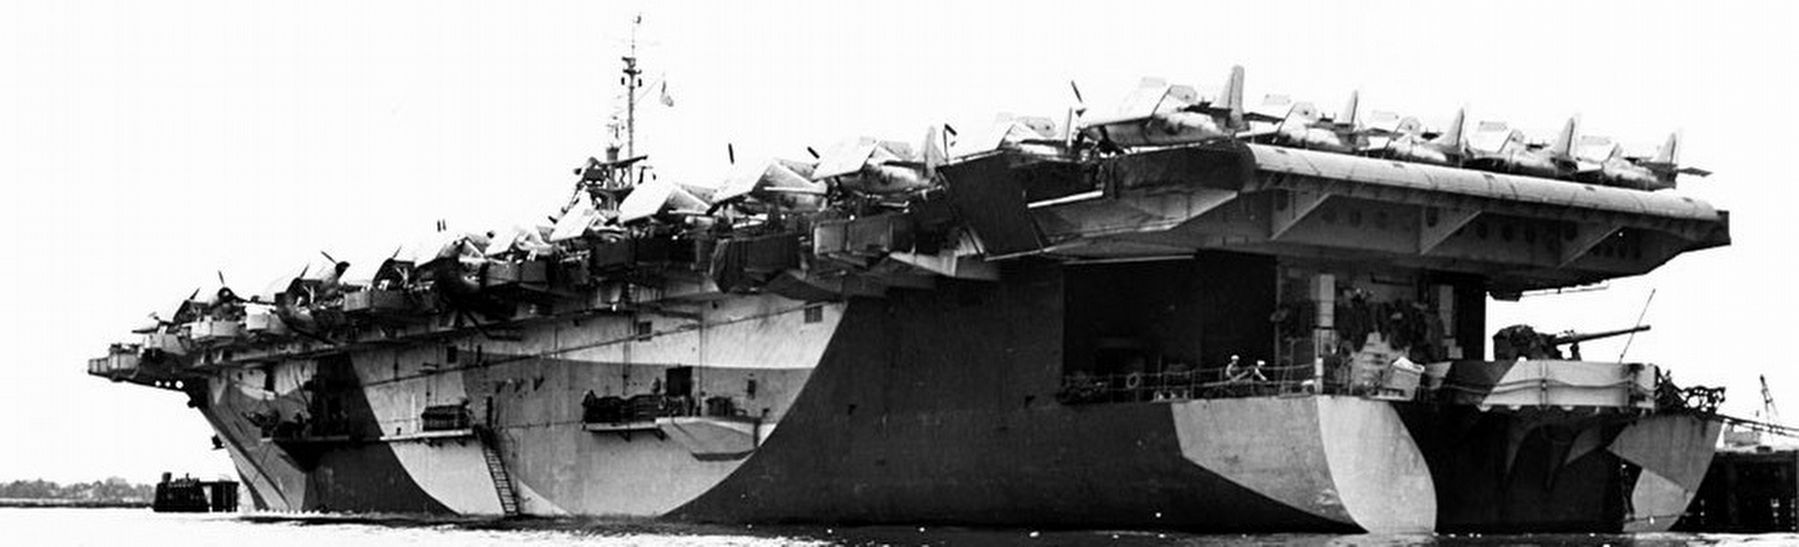 USS Gambier Bay (CVE 73) image. Click for full size.